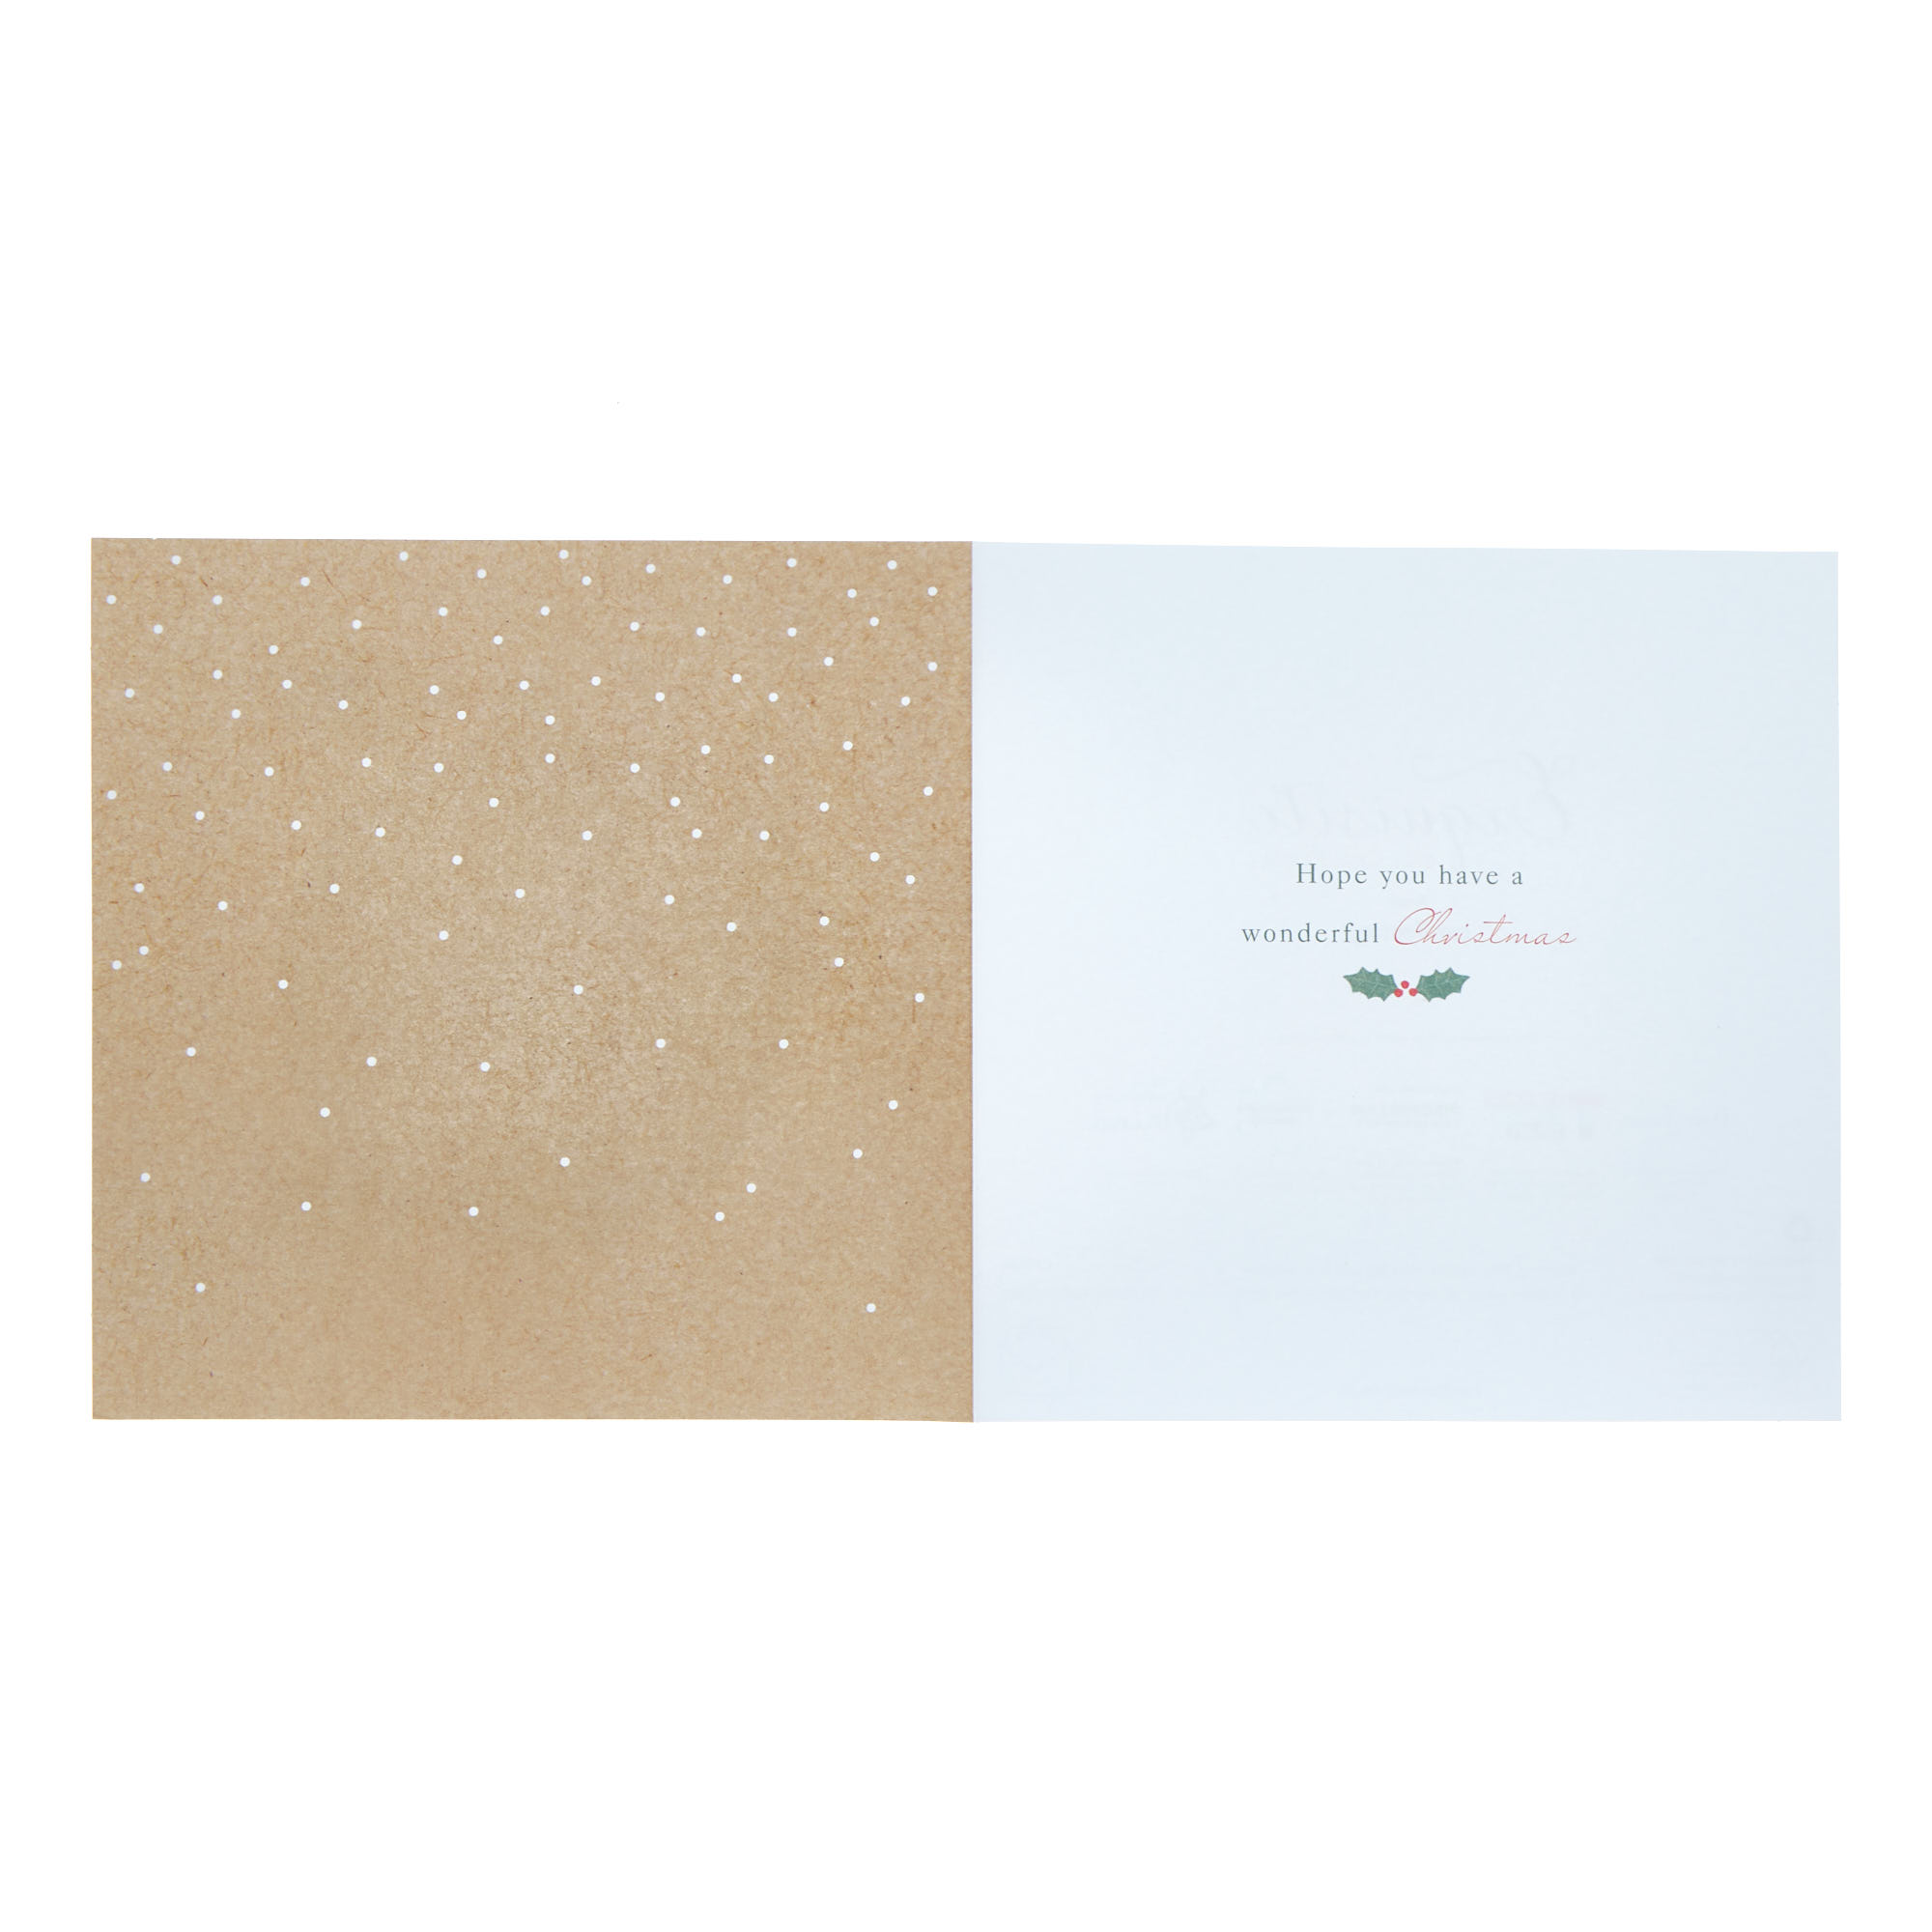 5 Luxury Charity Christmas Cards - Golden Bauble (1 Design) 